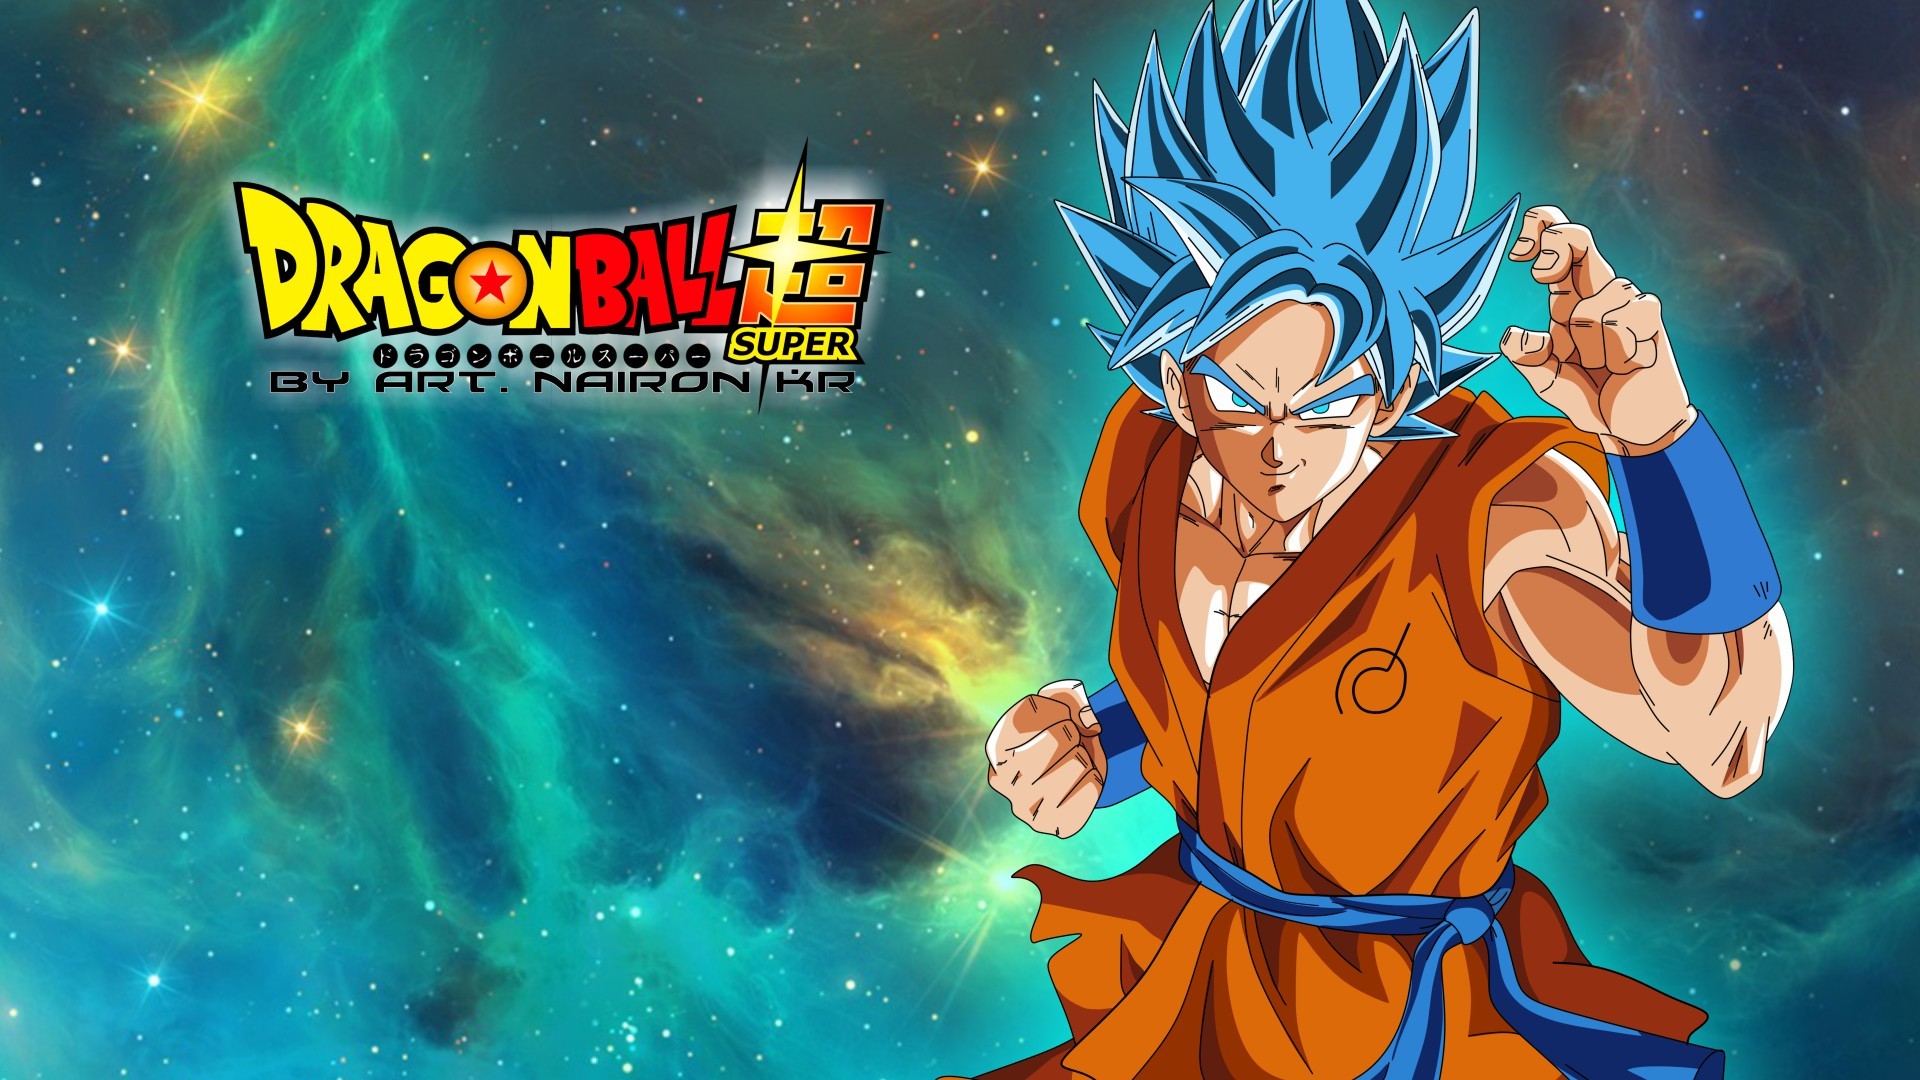 Goku SSJ Blue Wallpaper HD with image resolution 1920x1080 pixel. You can make this wallpaper for your Desktop Computer Backgrounds, Mac Wallpapers, Android Lock screen or iPhone Screensavers